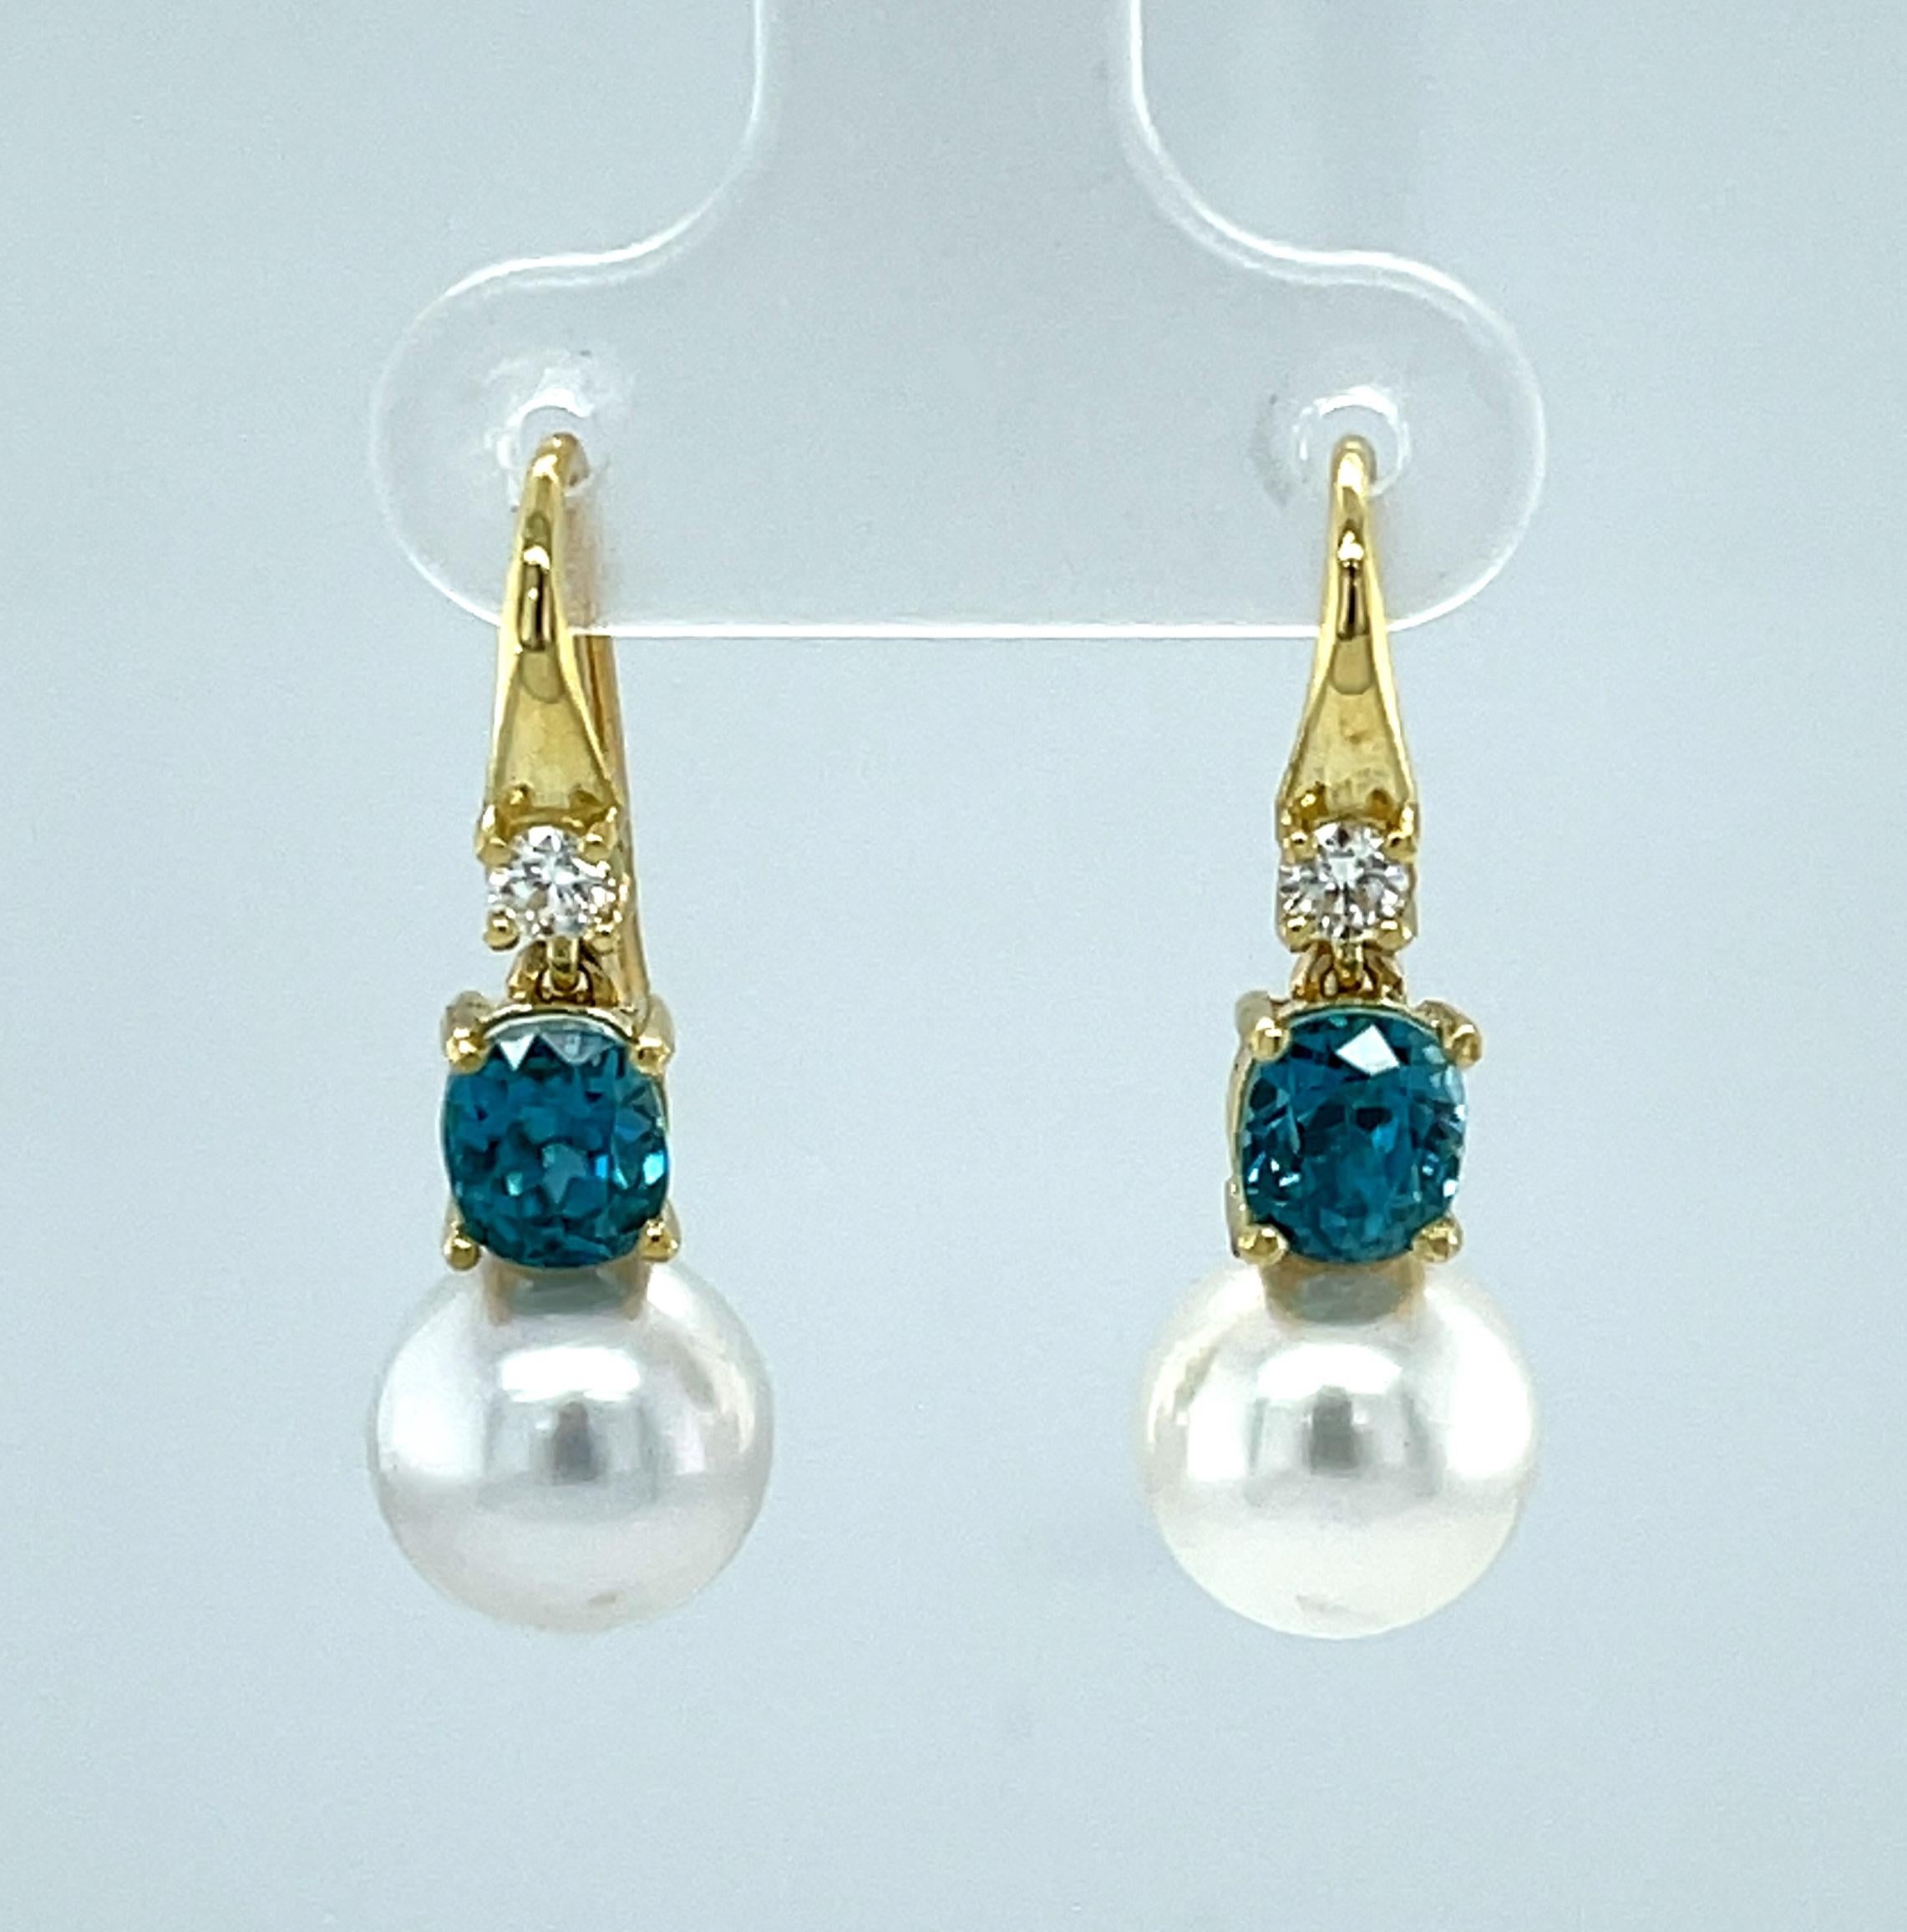 These beautiful dangling earrings feature a pair of gorgeous 9mm South Sea pearls paired with sparkling blue zircon and round brilliant-cut diamonds! Blue zircon gems are known for having exceptional brilliance and luster and this particular pair